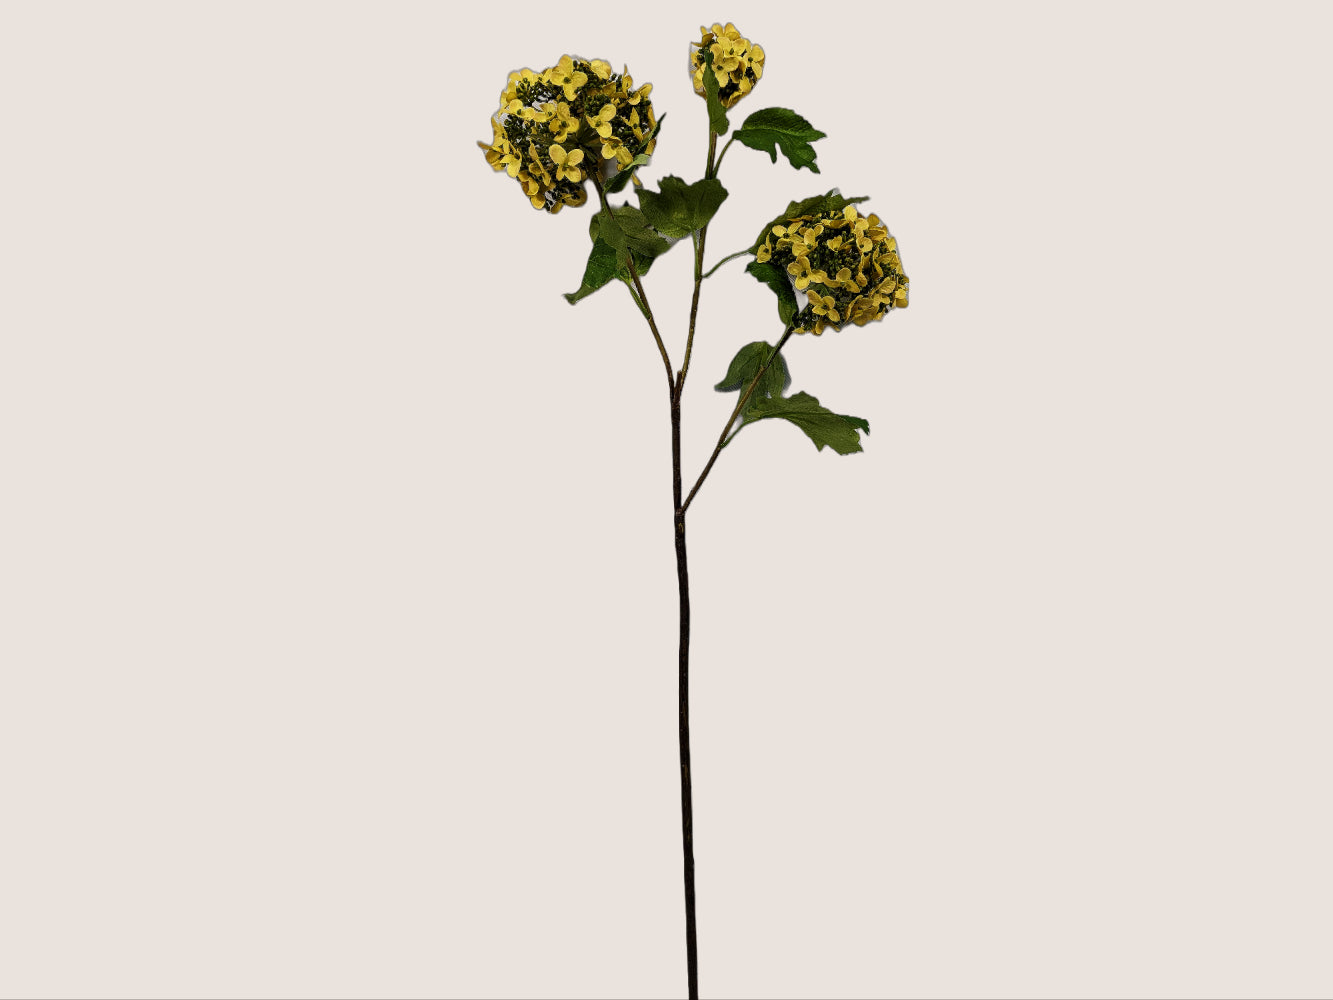 A faux yellow snowball hydrangea flower with three round clusters of petals on a green stem. The flower is 24 inches long and has three different sizes of blooms. The background is a plain beige color.